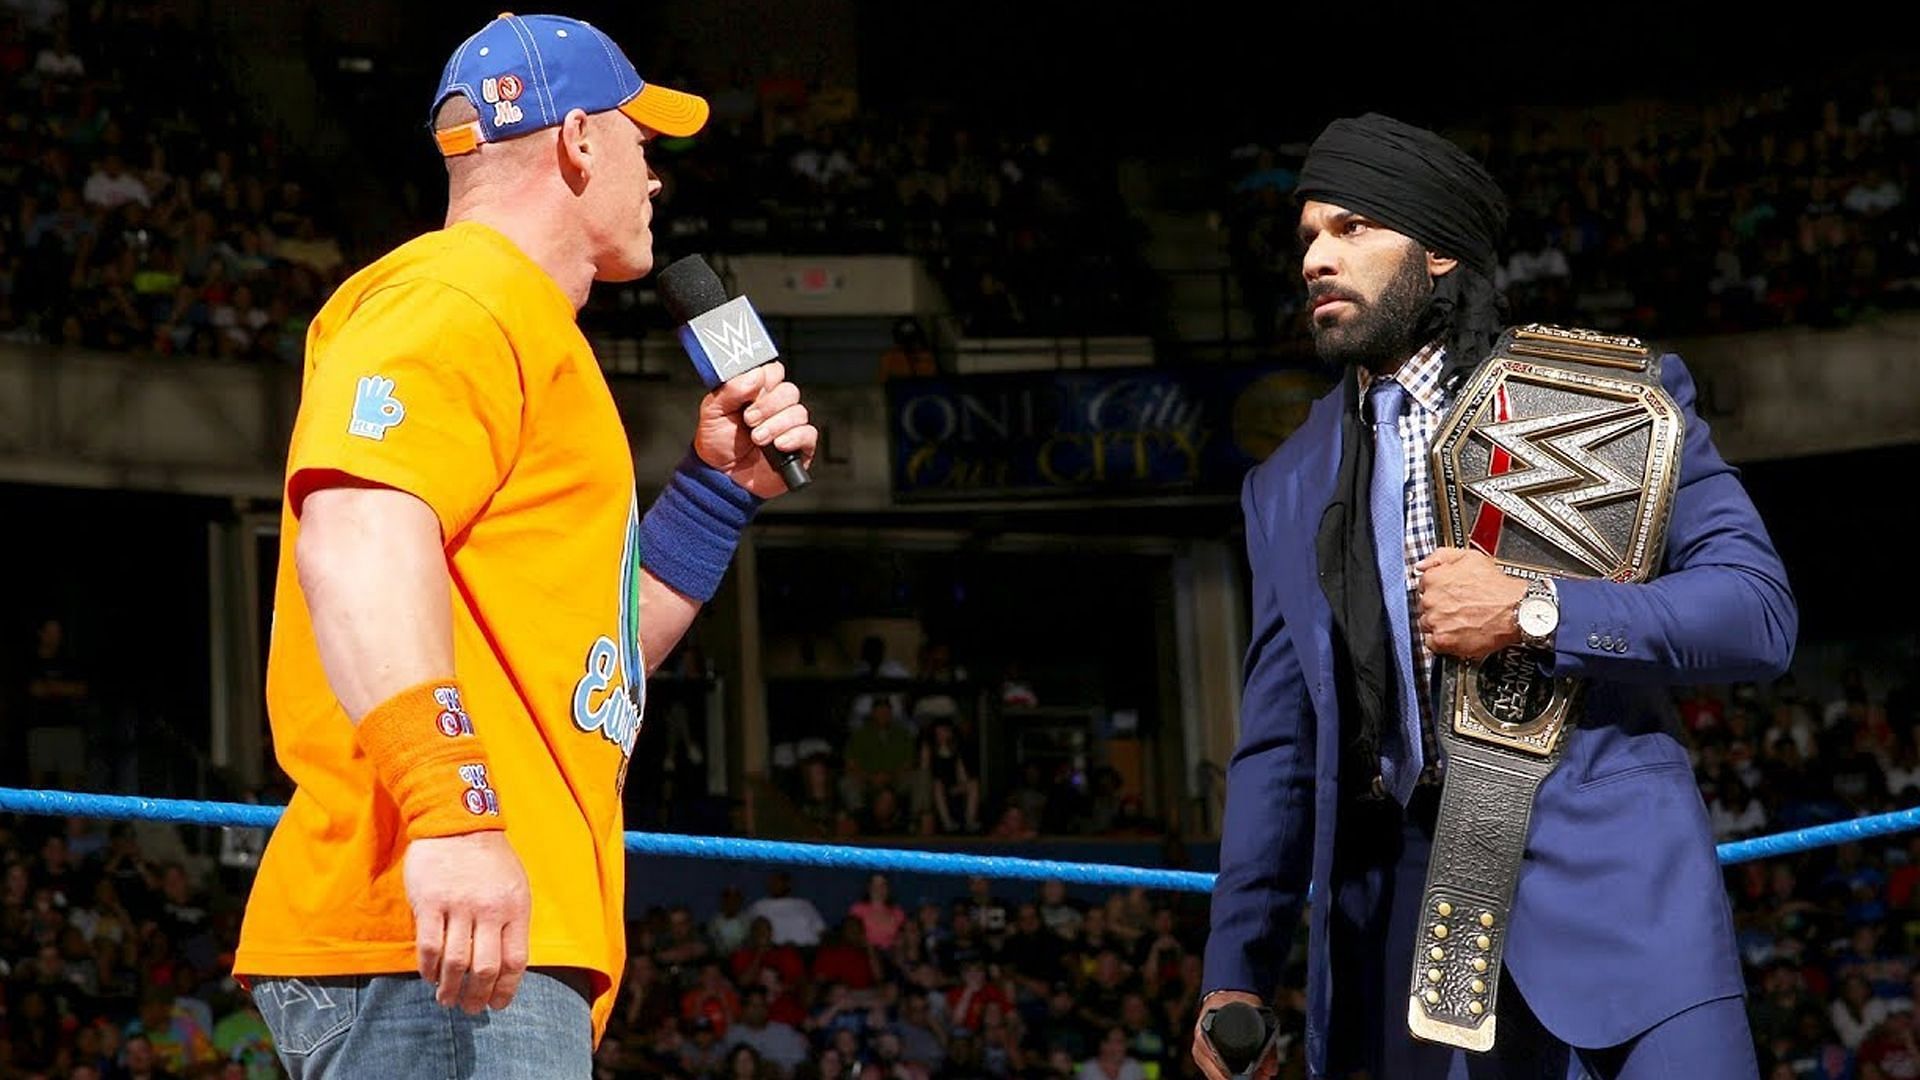 Jinder Mahal &amp; Cena both engaged in a feud back in 2017